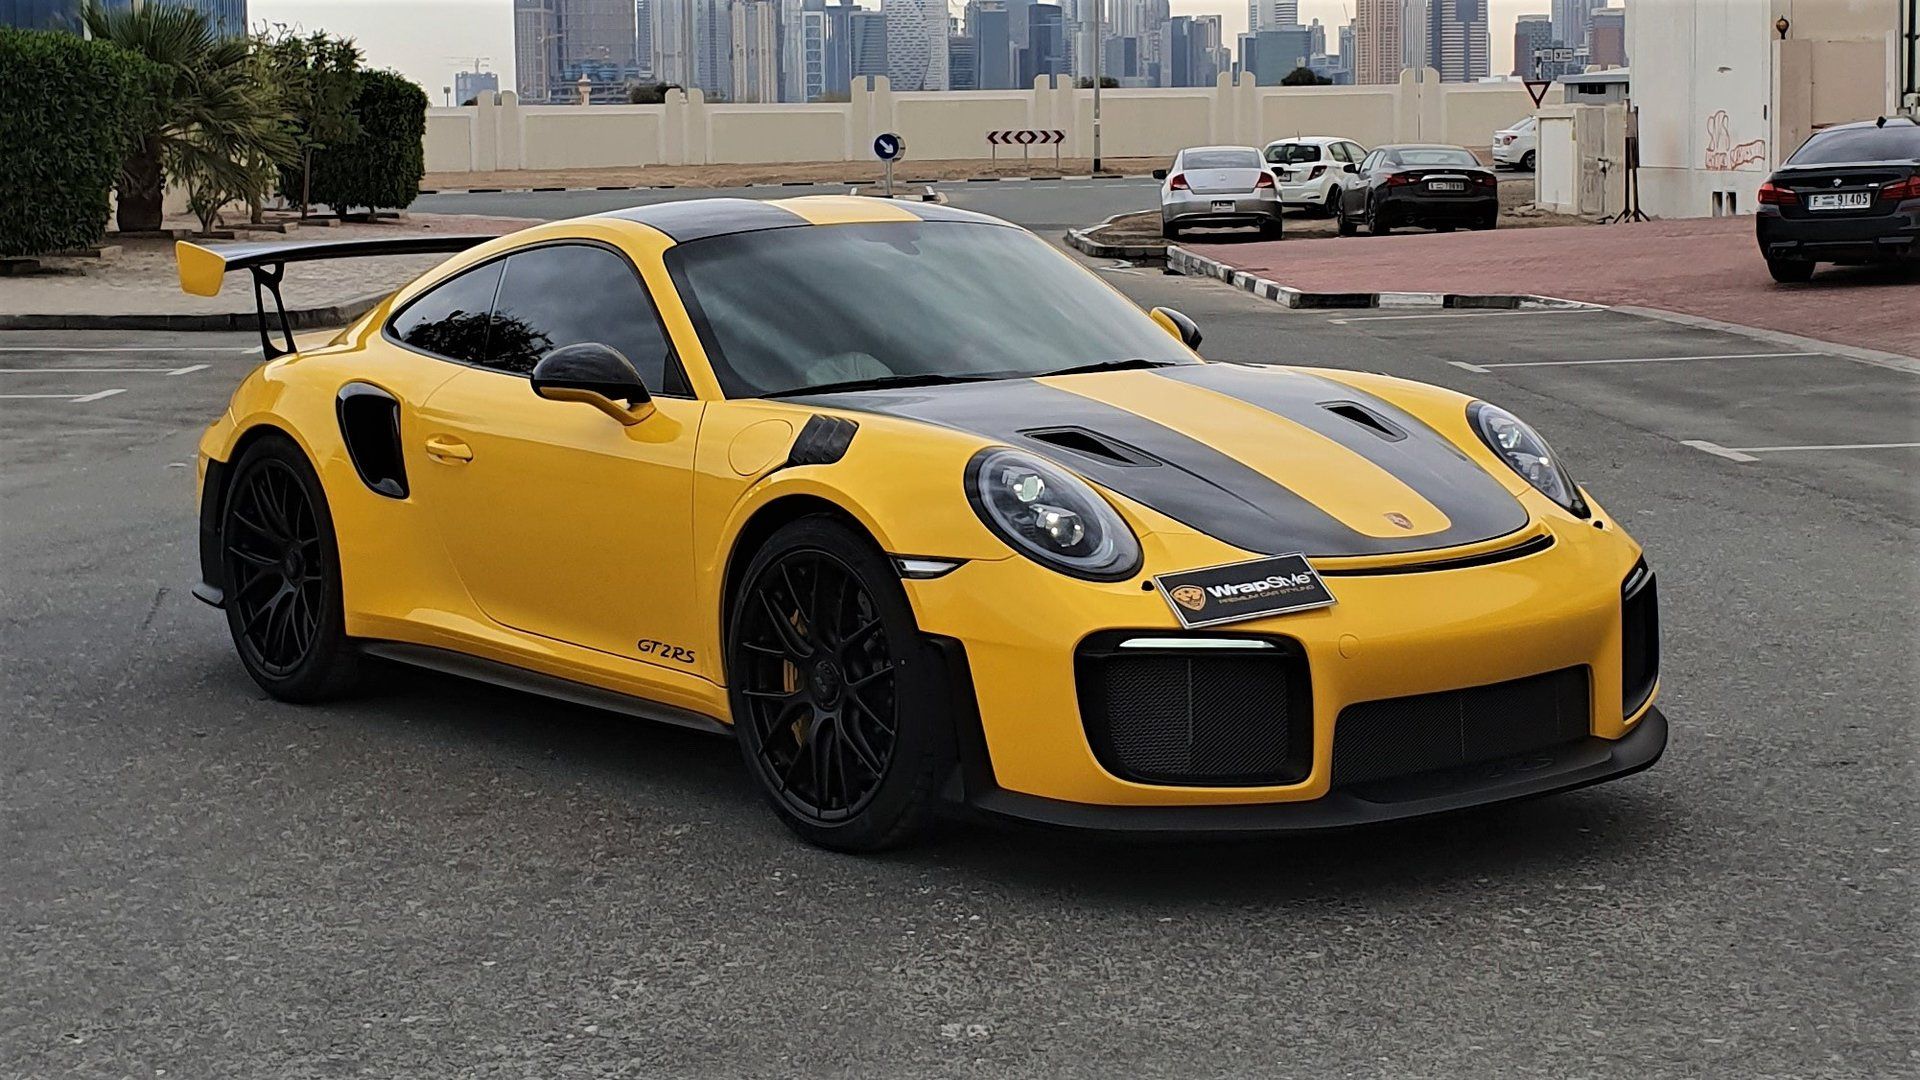 the Porsche 911 GT2 RS is an Engineering Marvel